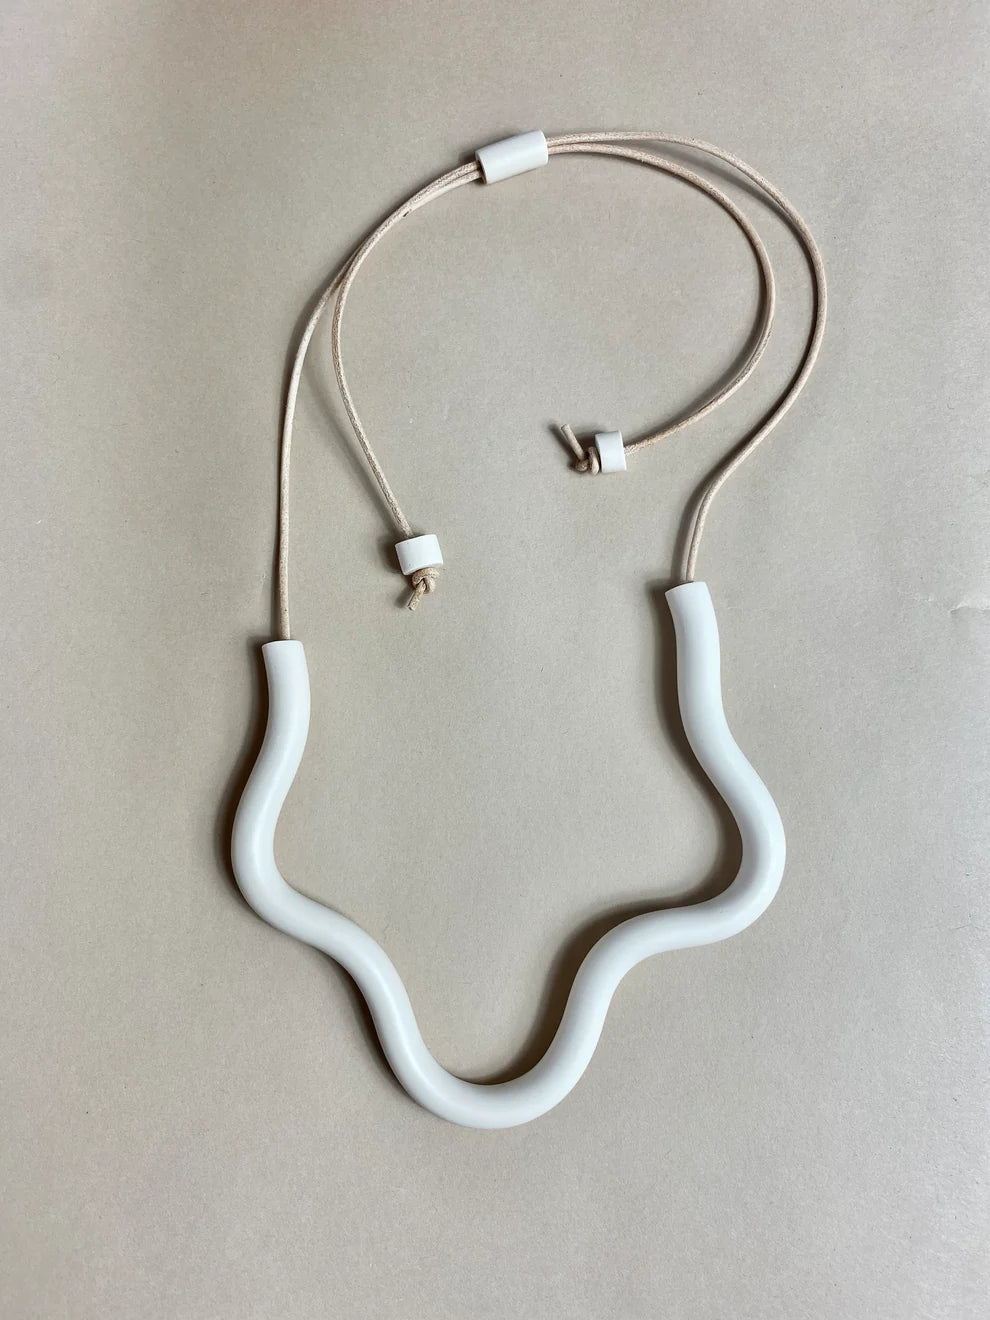 Organic Form Necklace - Cream - | Little Pieces Jewelry